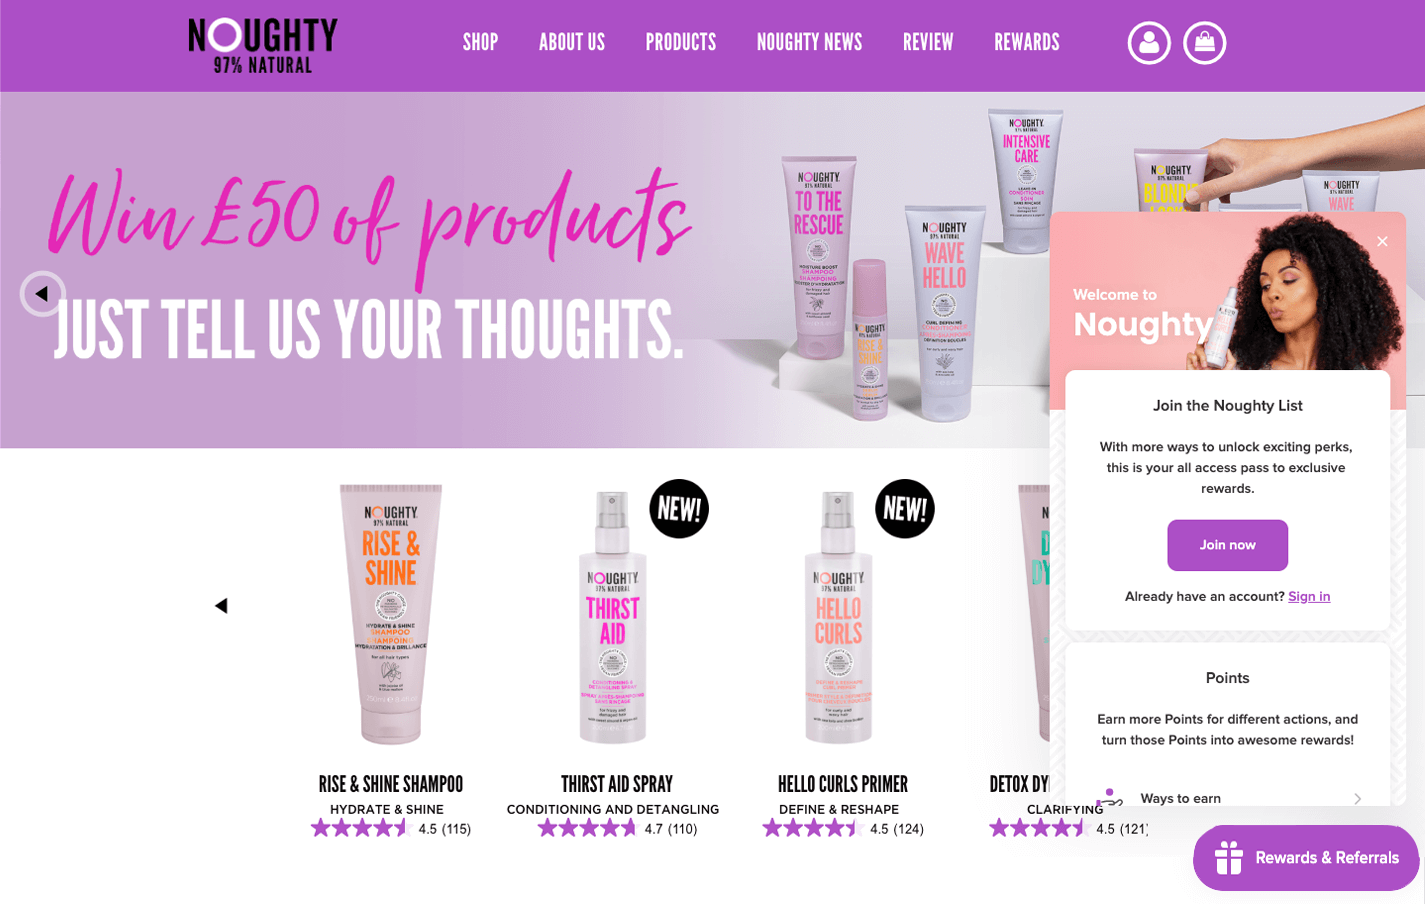 Noughty Haircare brand colors